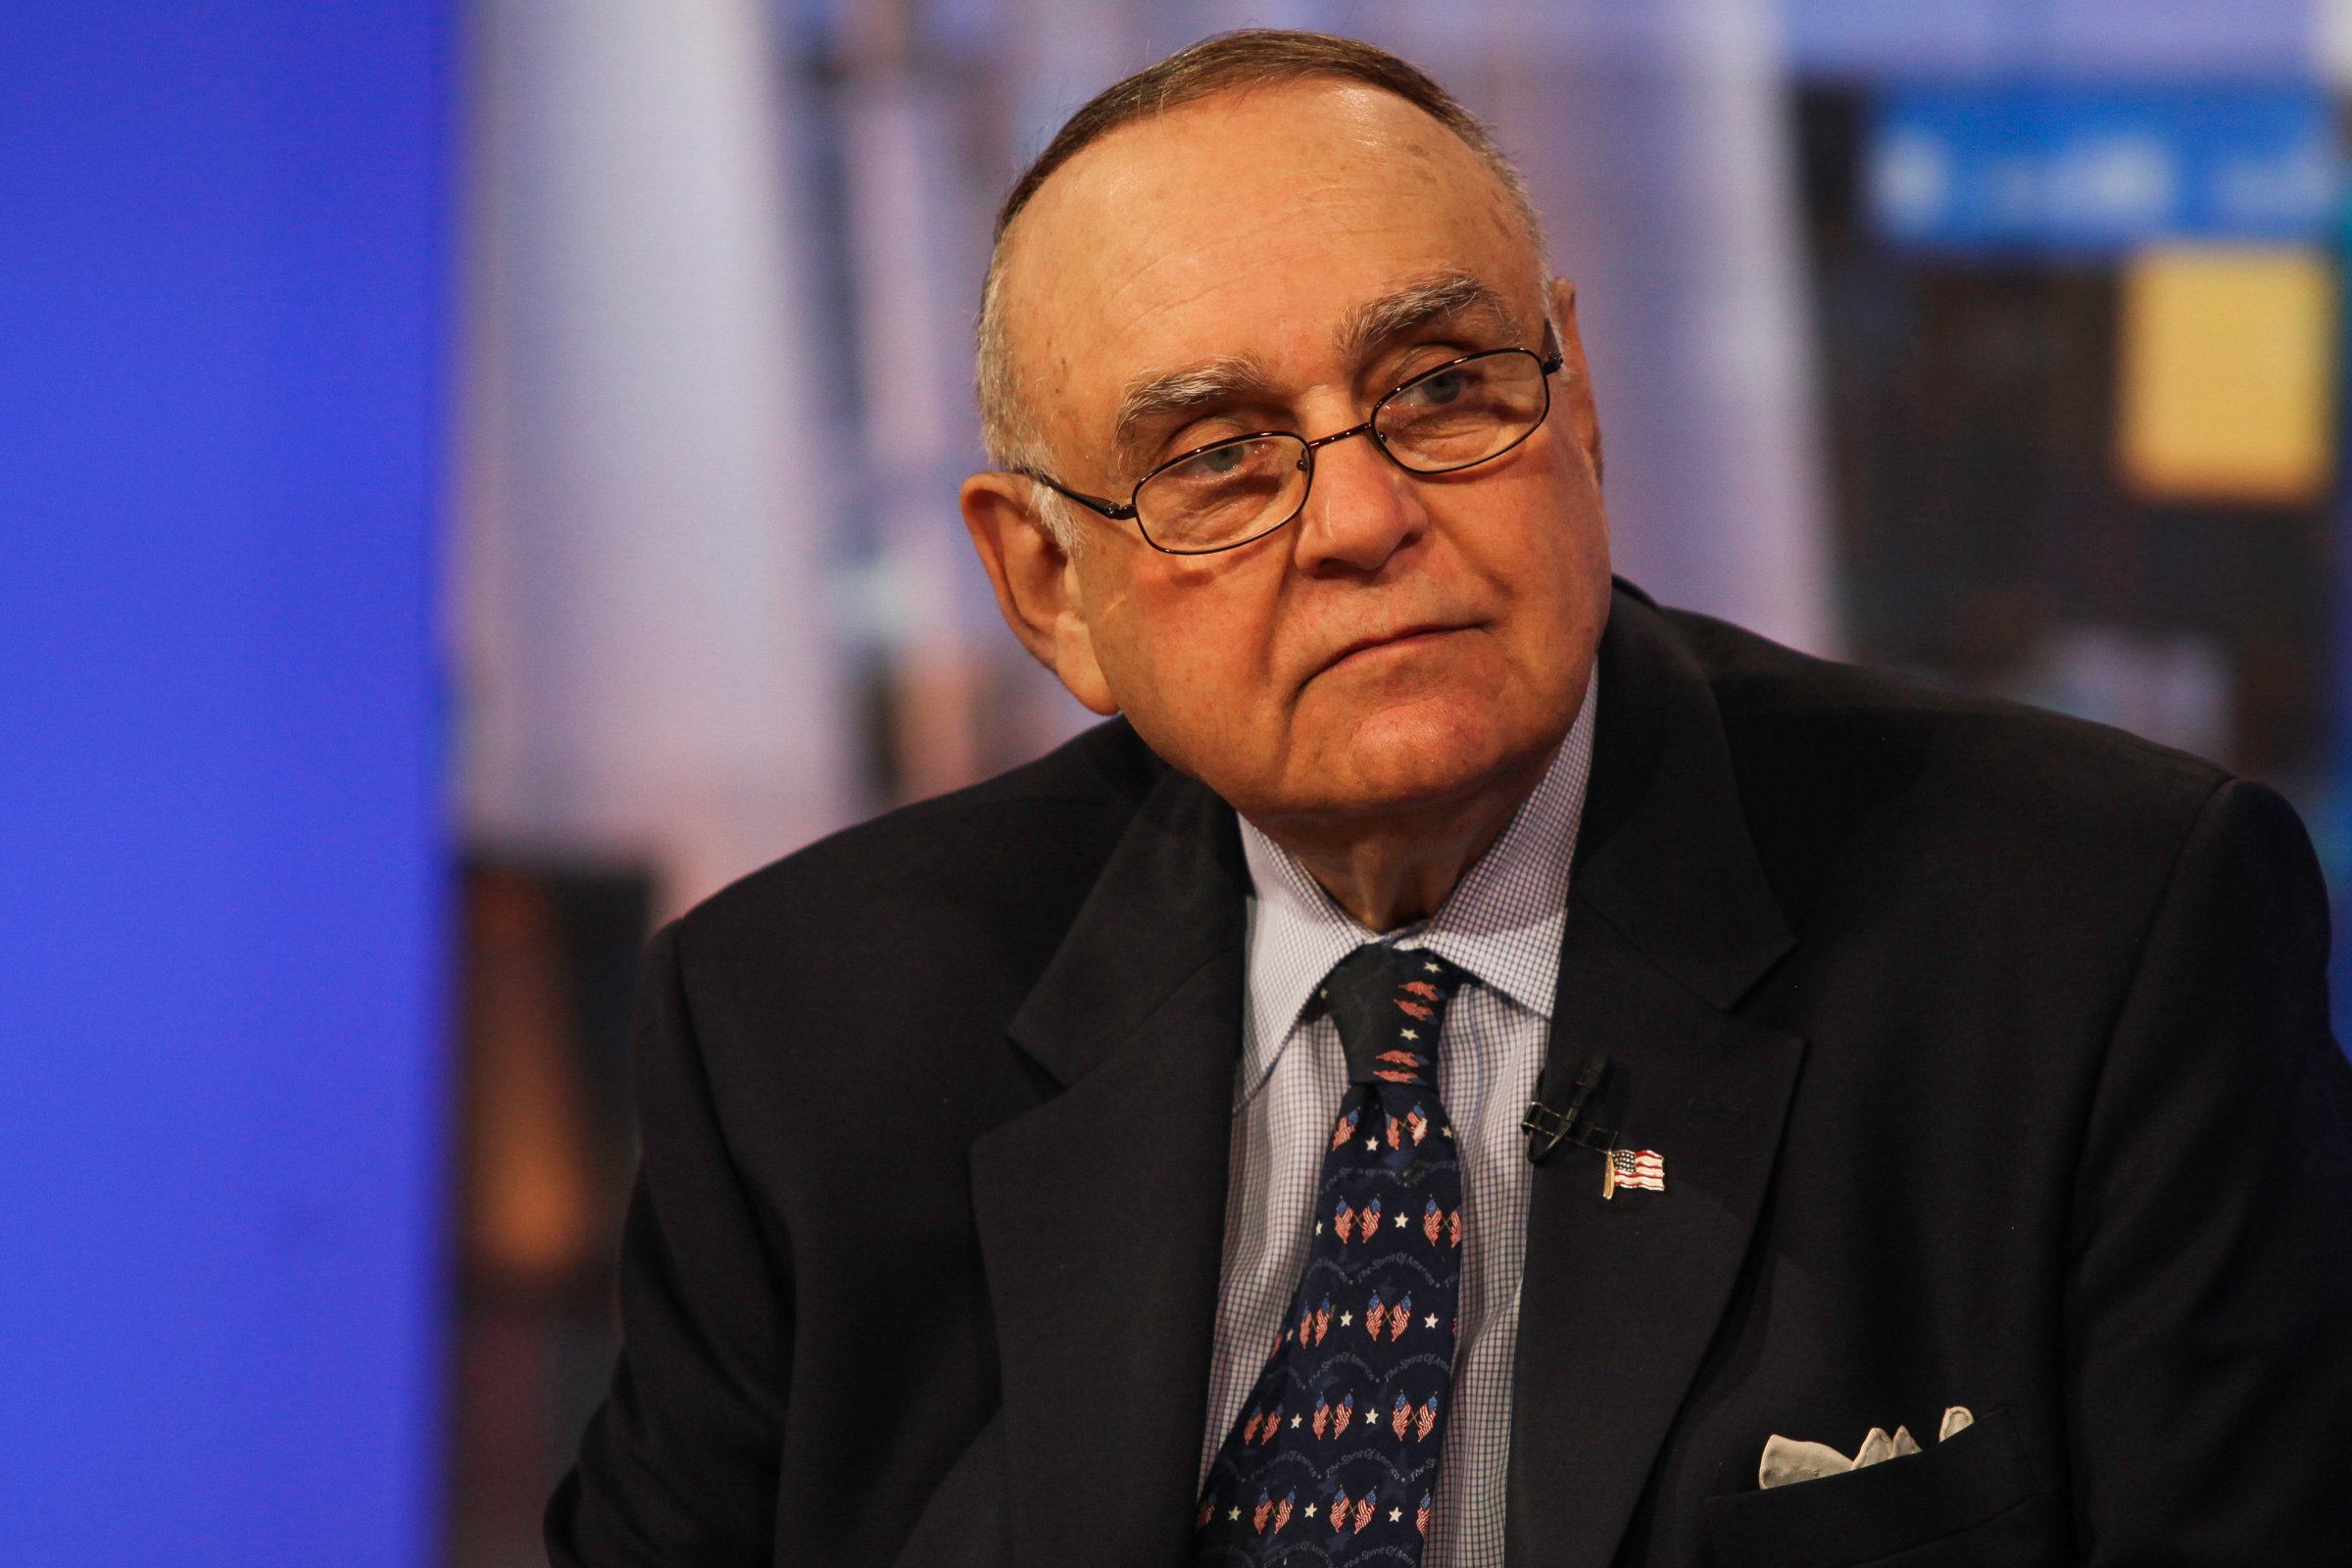 Omega Advisors Inc. Chief Executive Officer Leon Cooperman Interview